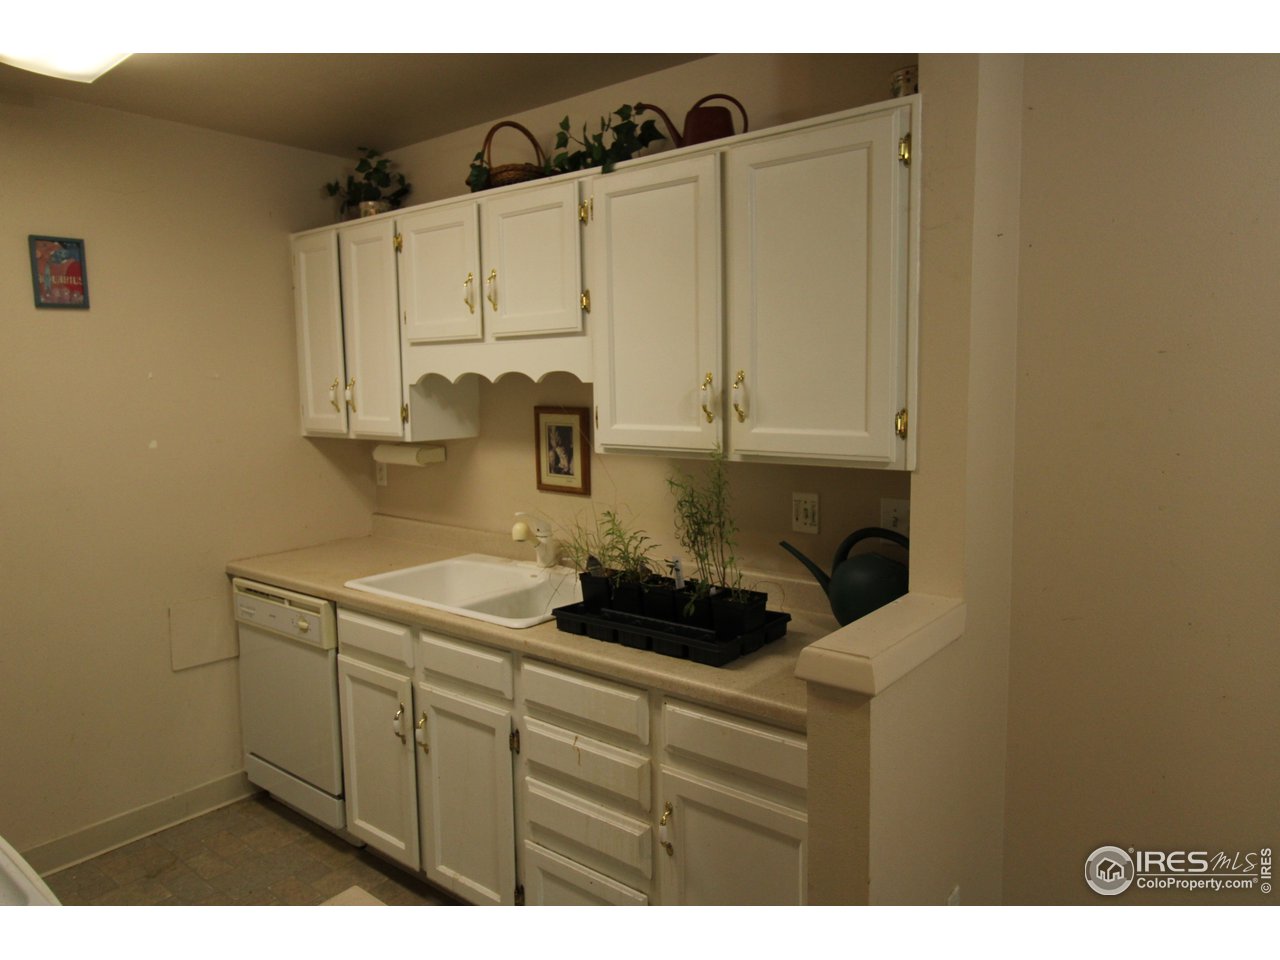 Good counter and cabinet space in kitchen